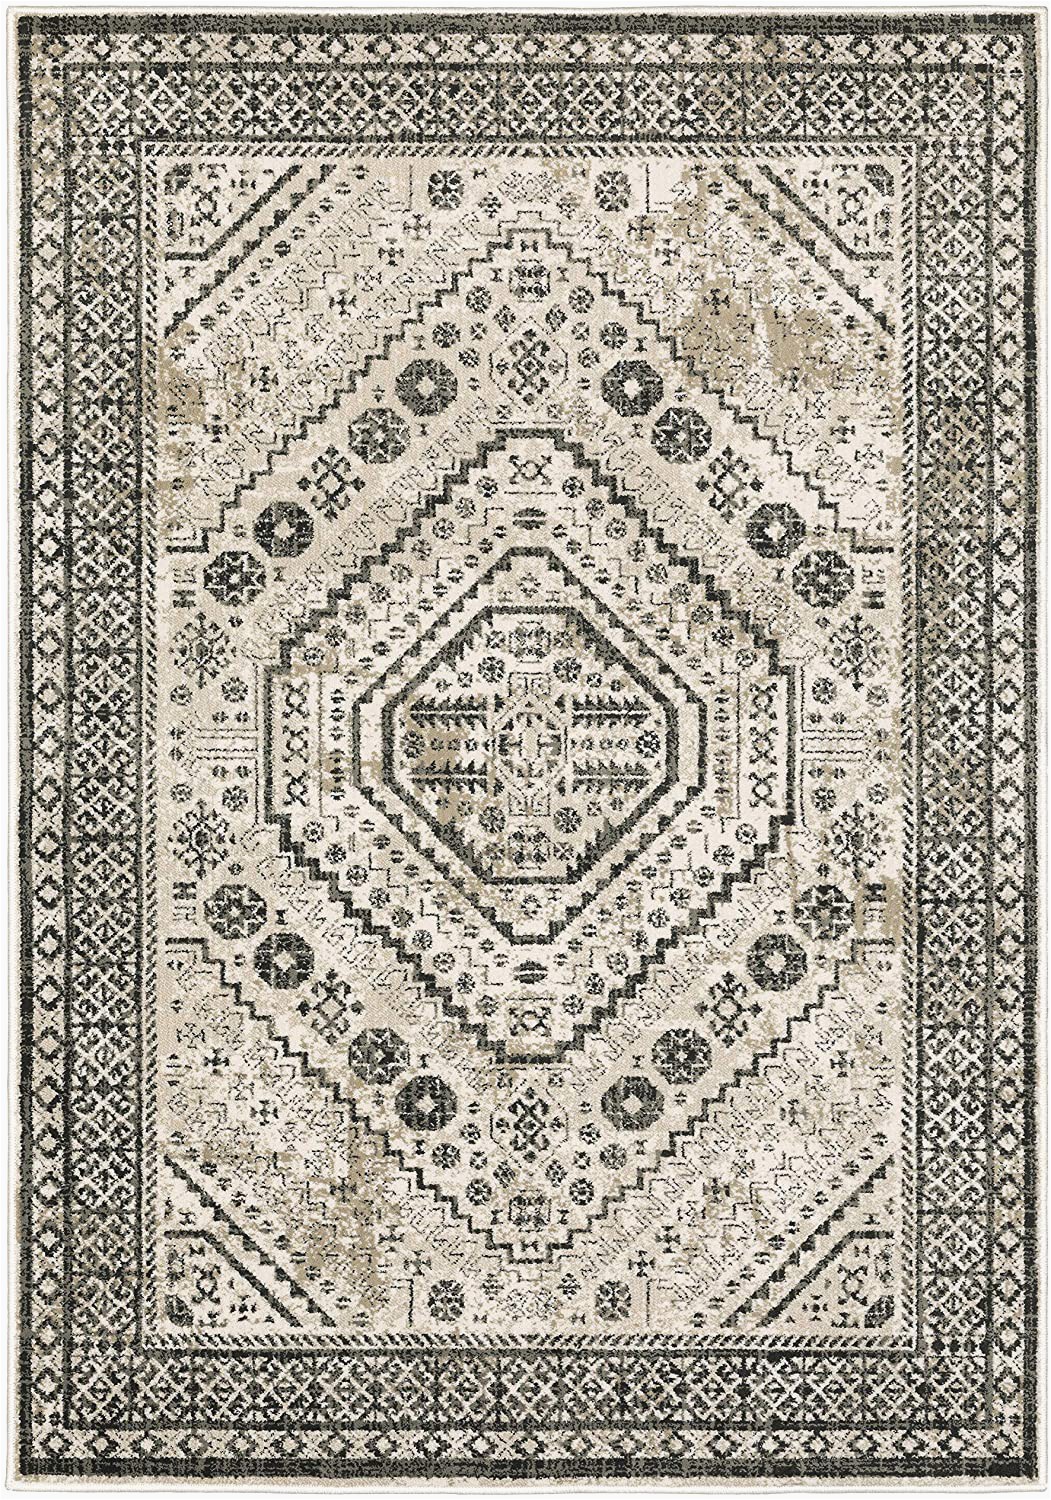 6 Ft by 9 Ft area Rugs Amazon Christopher Knight Home Glendale oriental